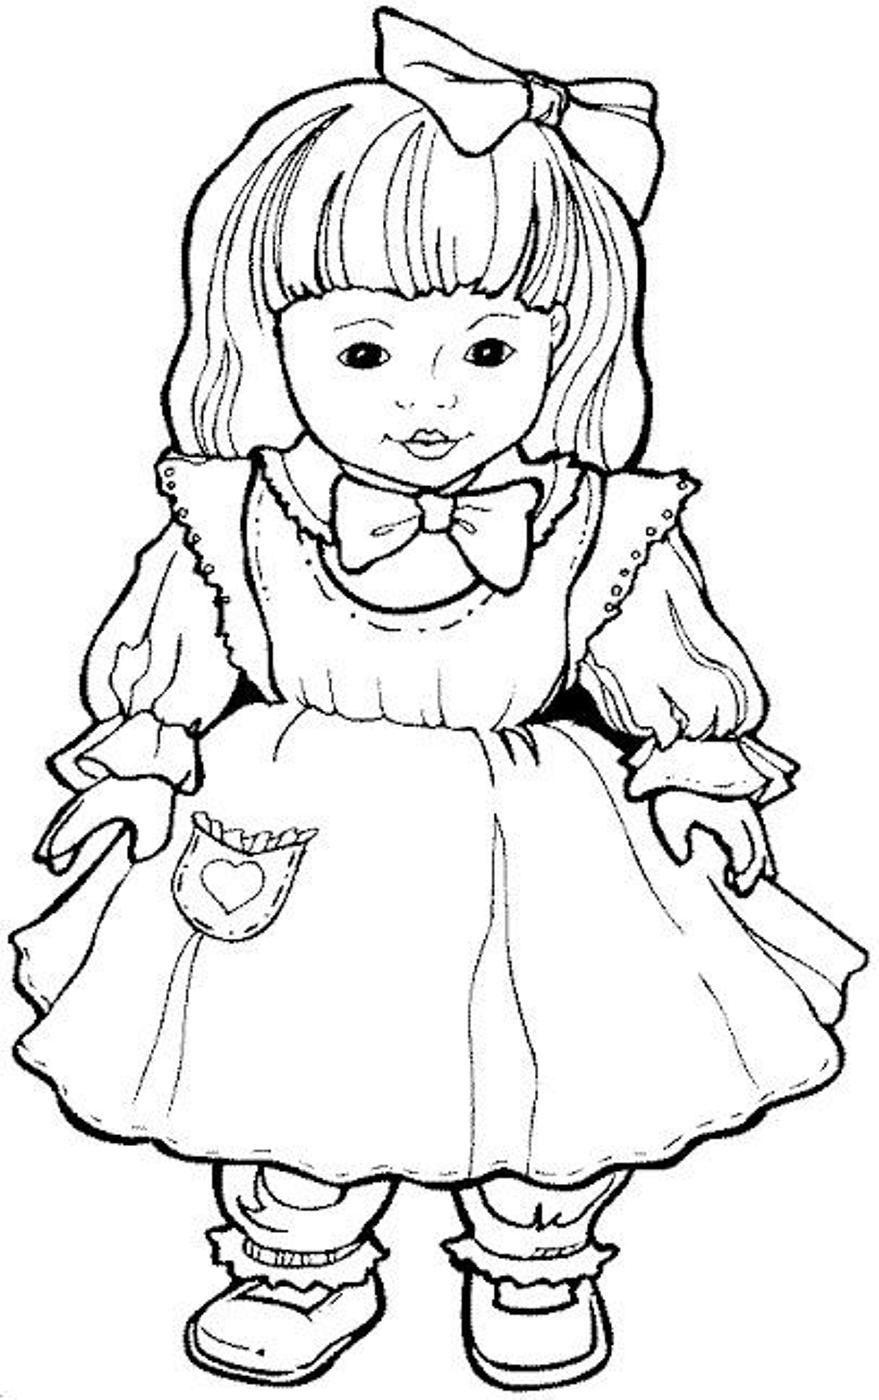 Coloring Pages Dolls - Coloring Home